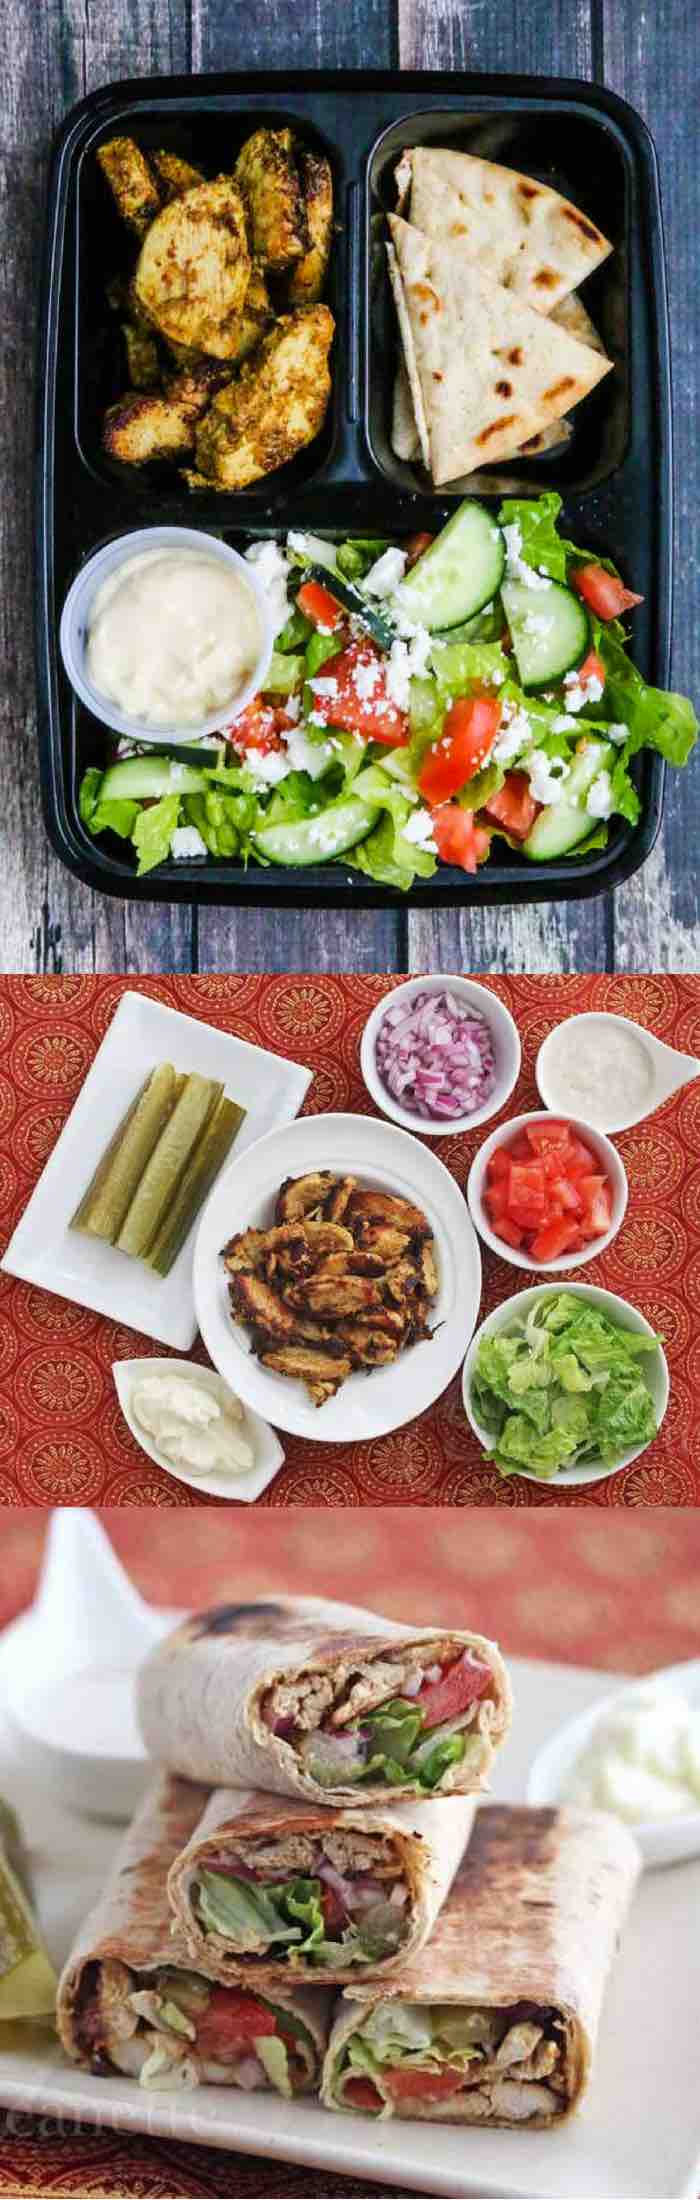 Shawarma chicken meal prep - delicious, healthy - just double the recipe for shawarma chicken and serve with a simple cucumber tomato salad